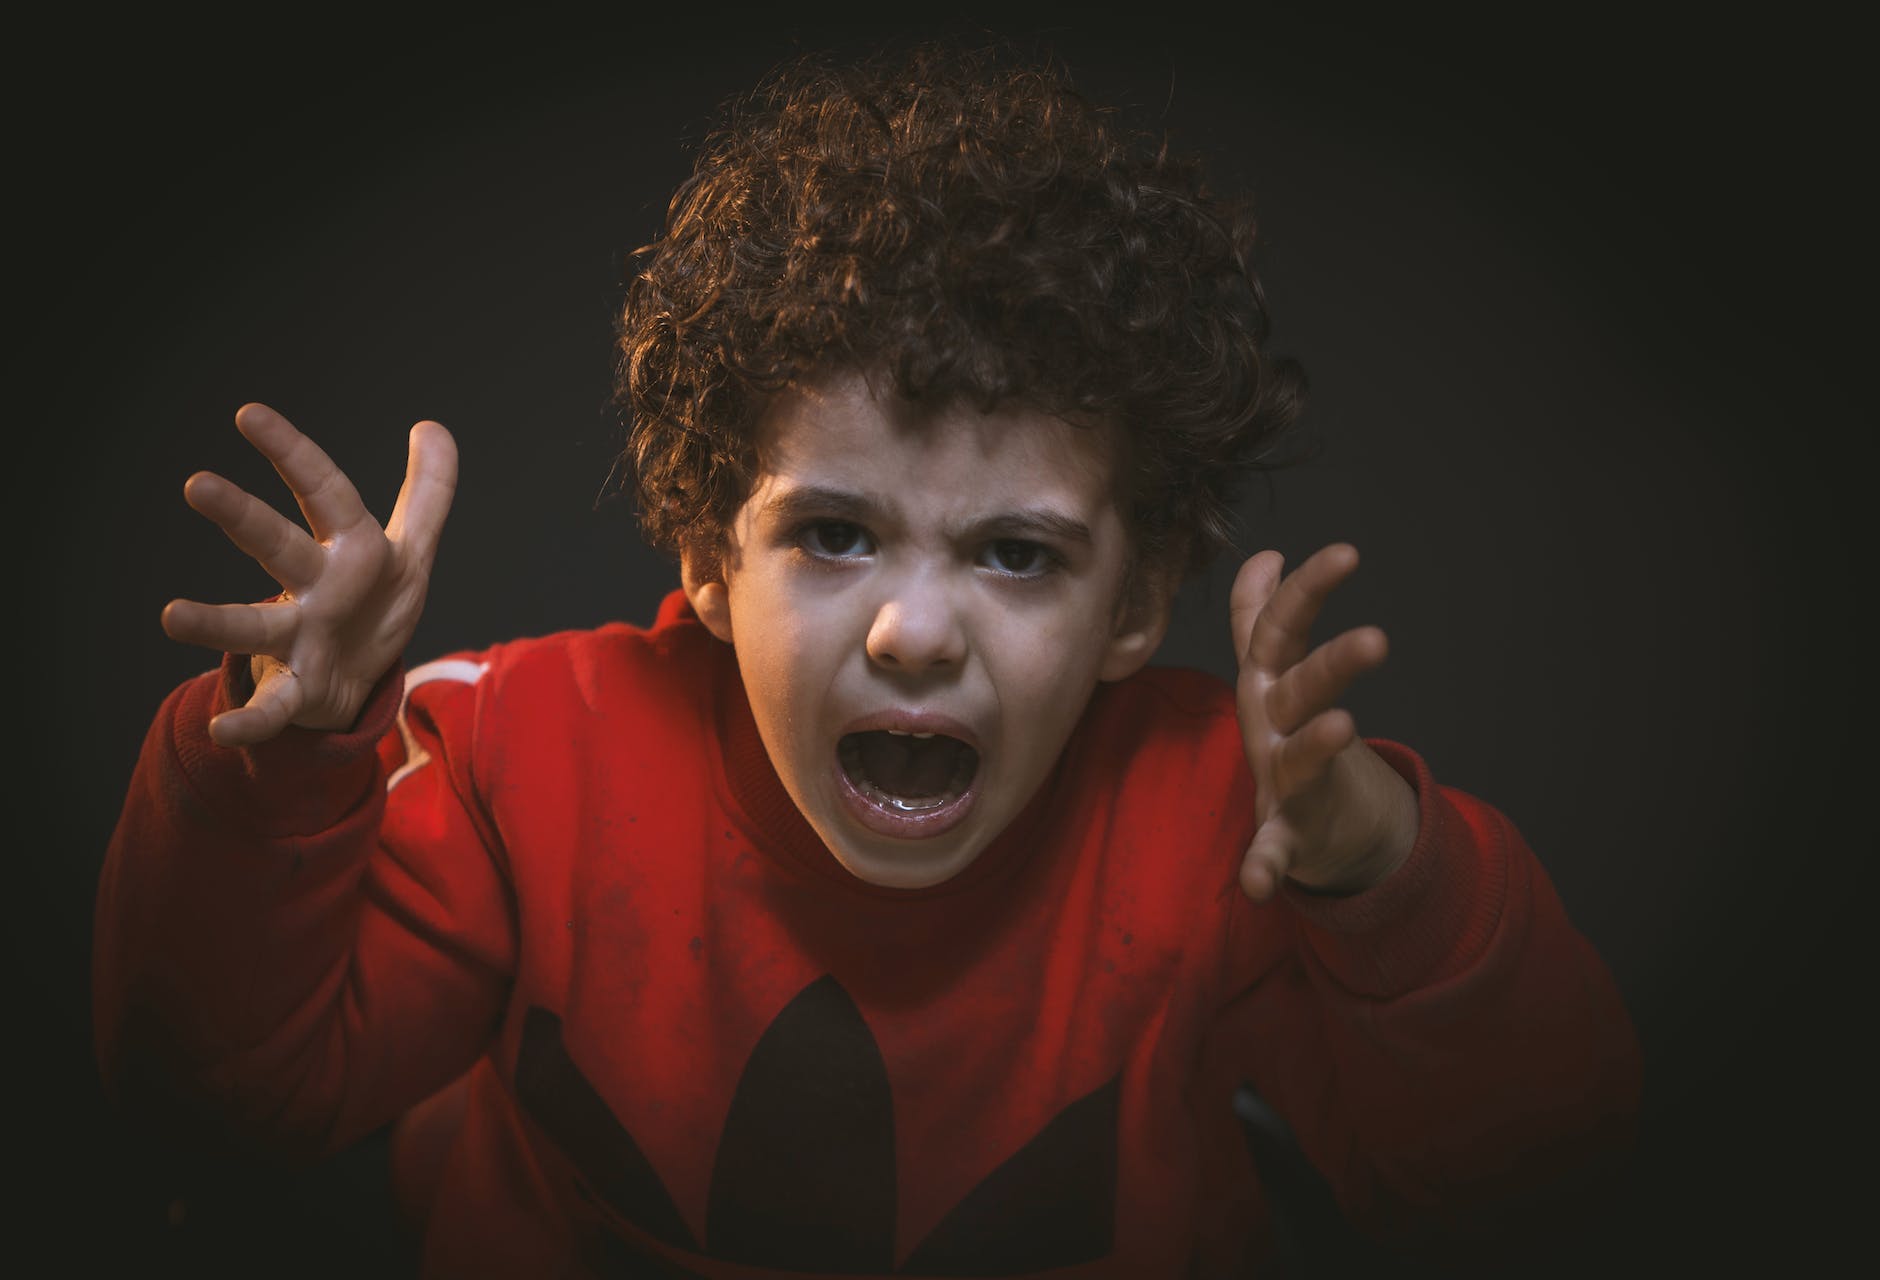 Toddler with red adidas sweat shirt anger